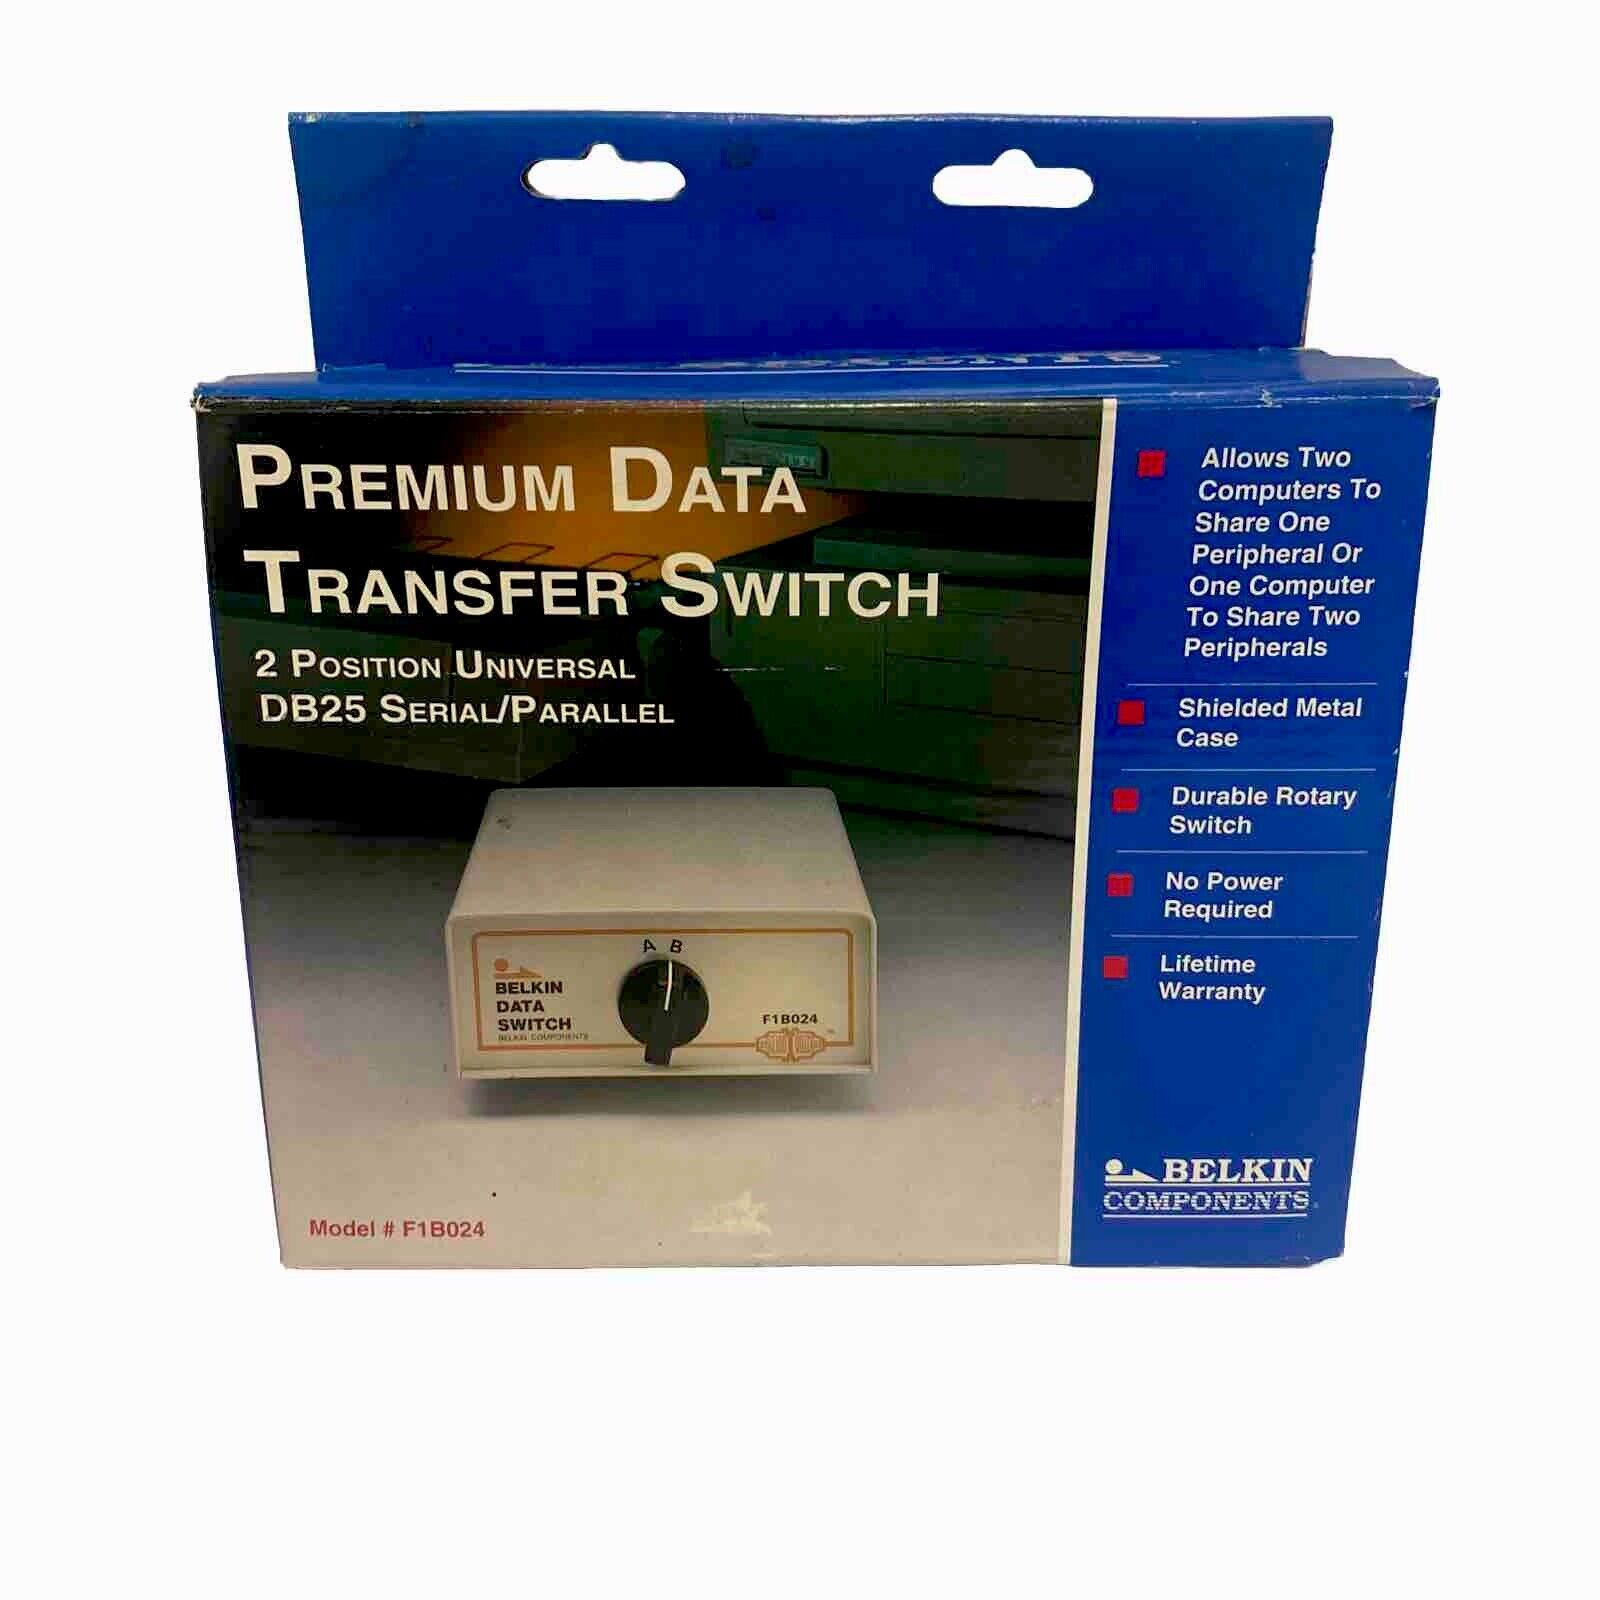 VTG Computer Collector Special - NEW Belkin Premium data Transfer Switch F1B024